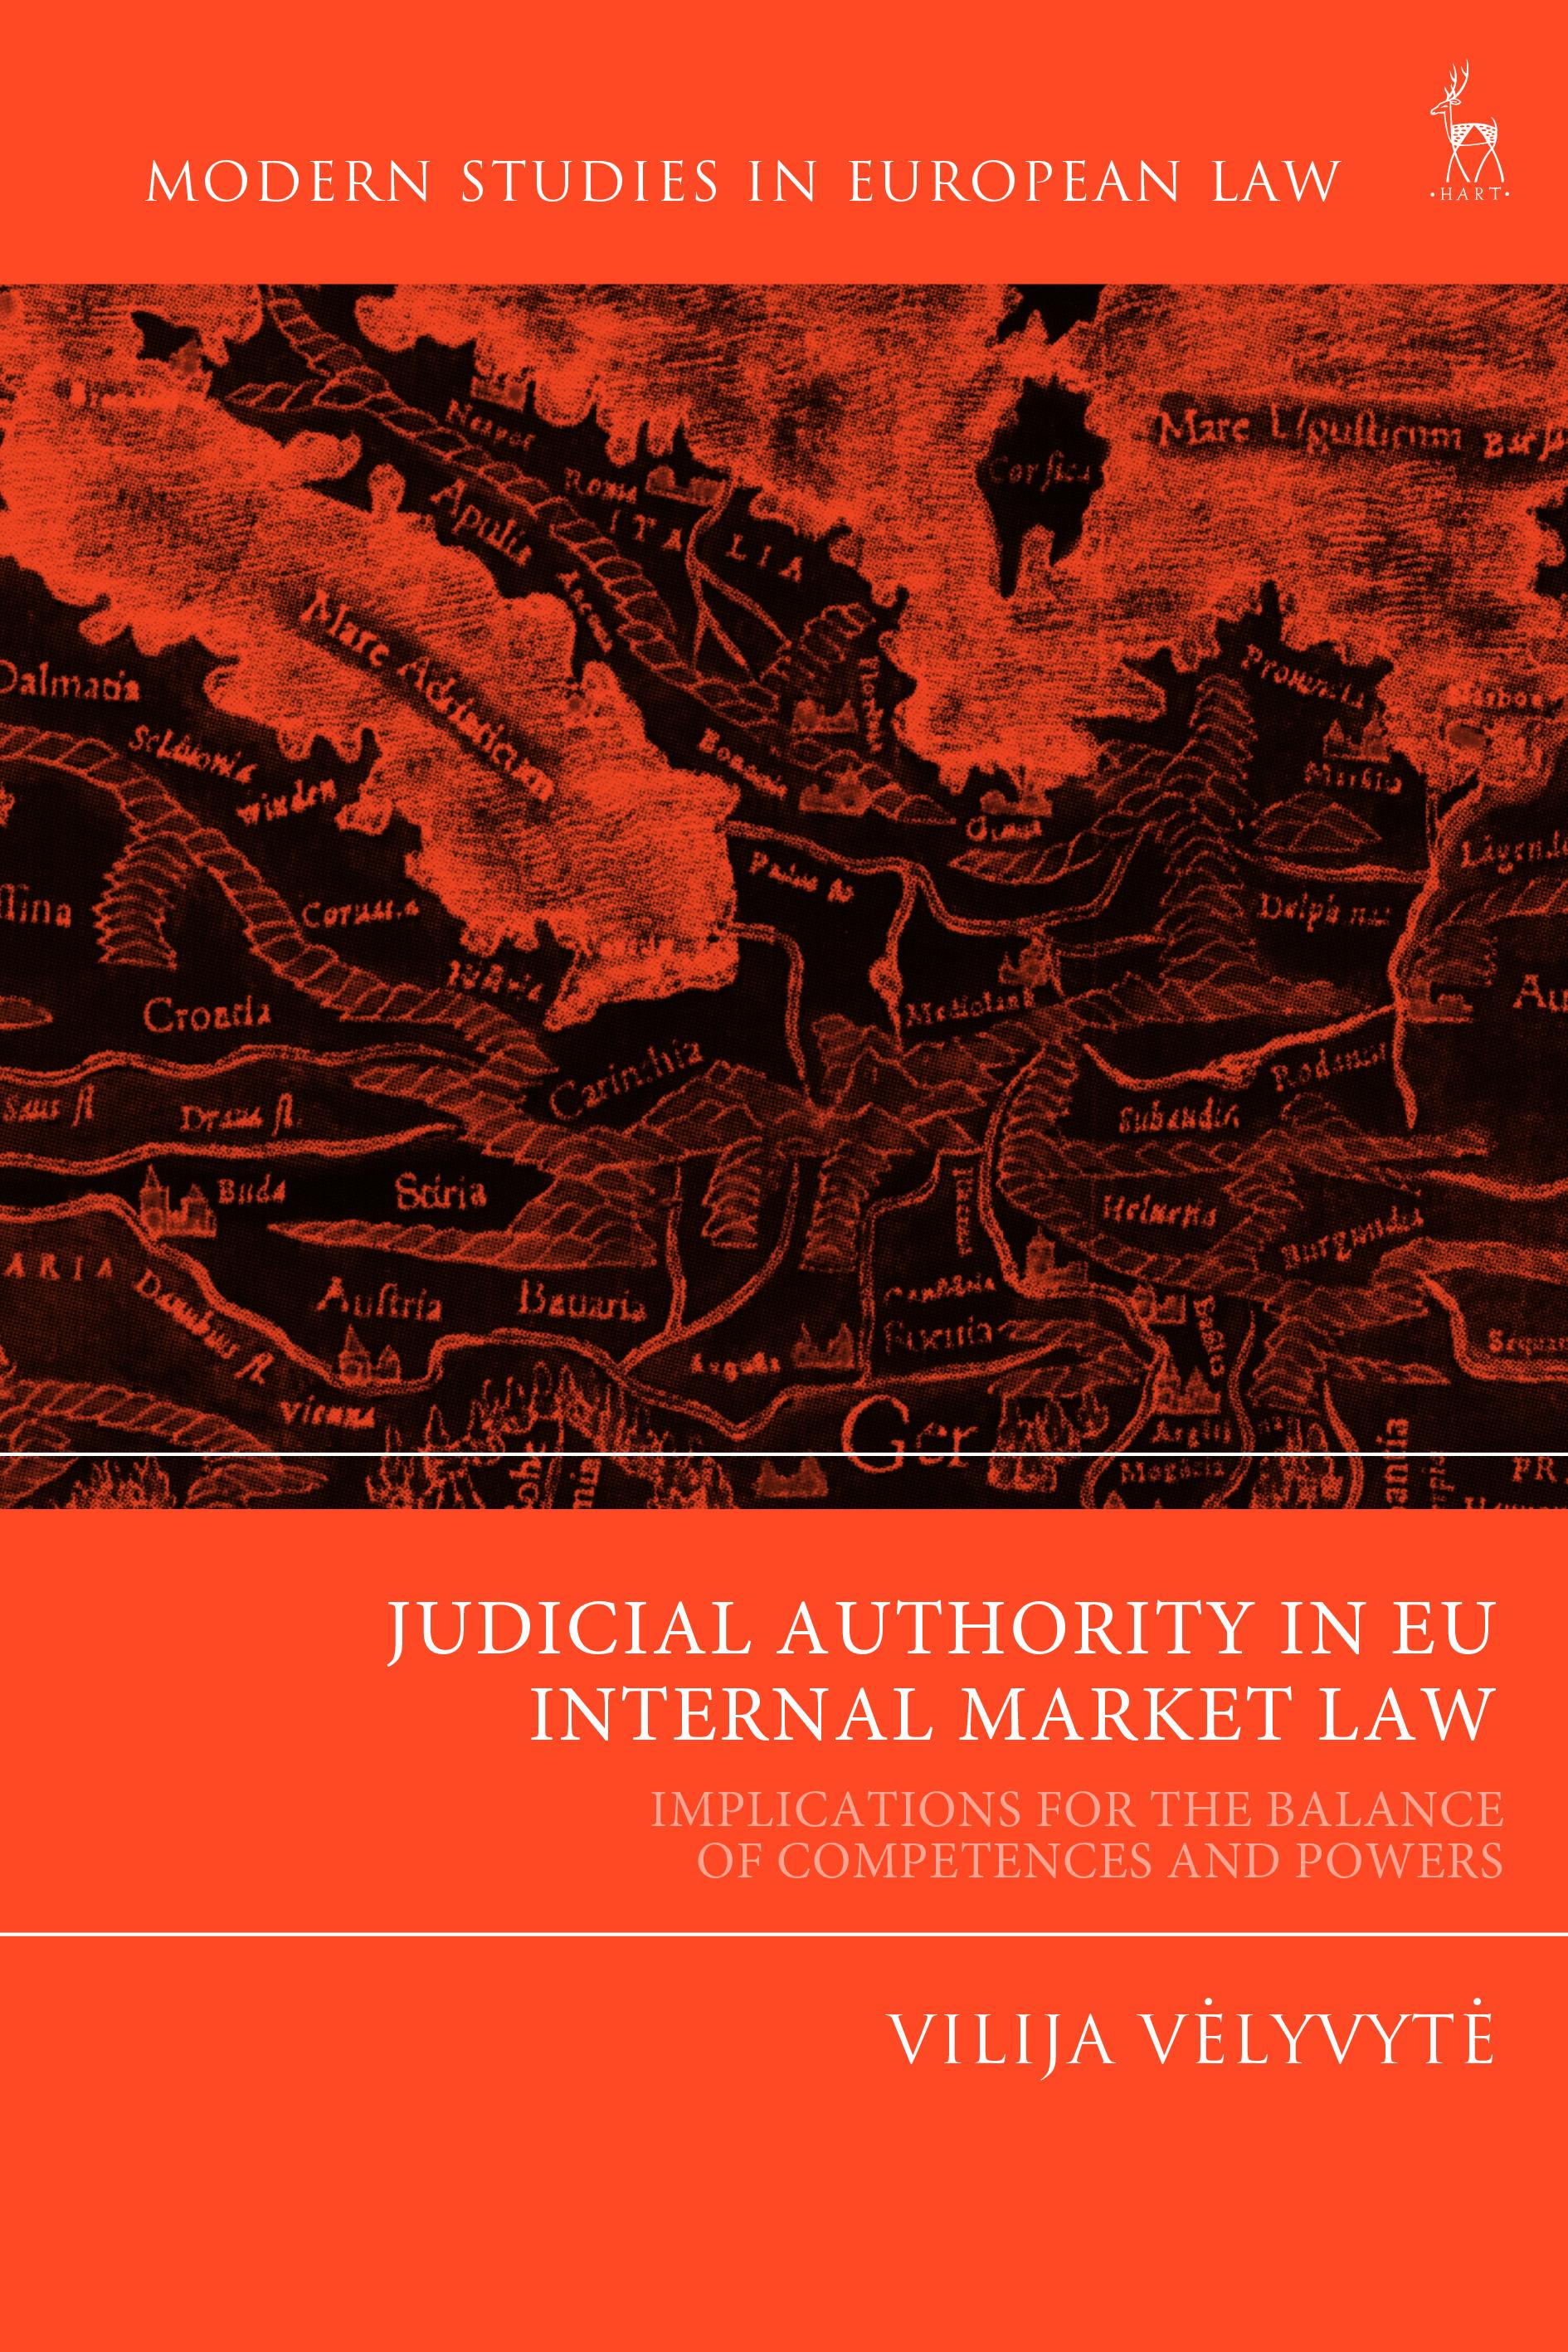 An image of the front cover of the book, "Judicial Authority in EU Internal Market Law: Implications for the Balance of Competences and Powers"